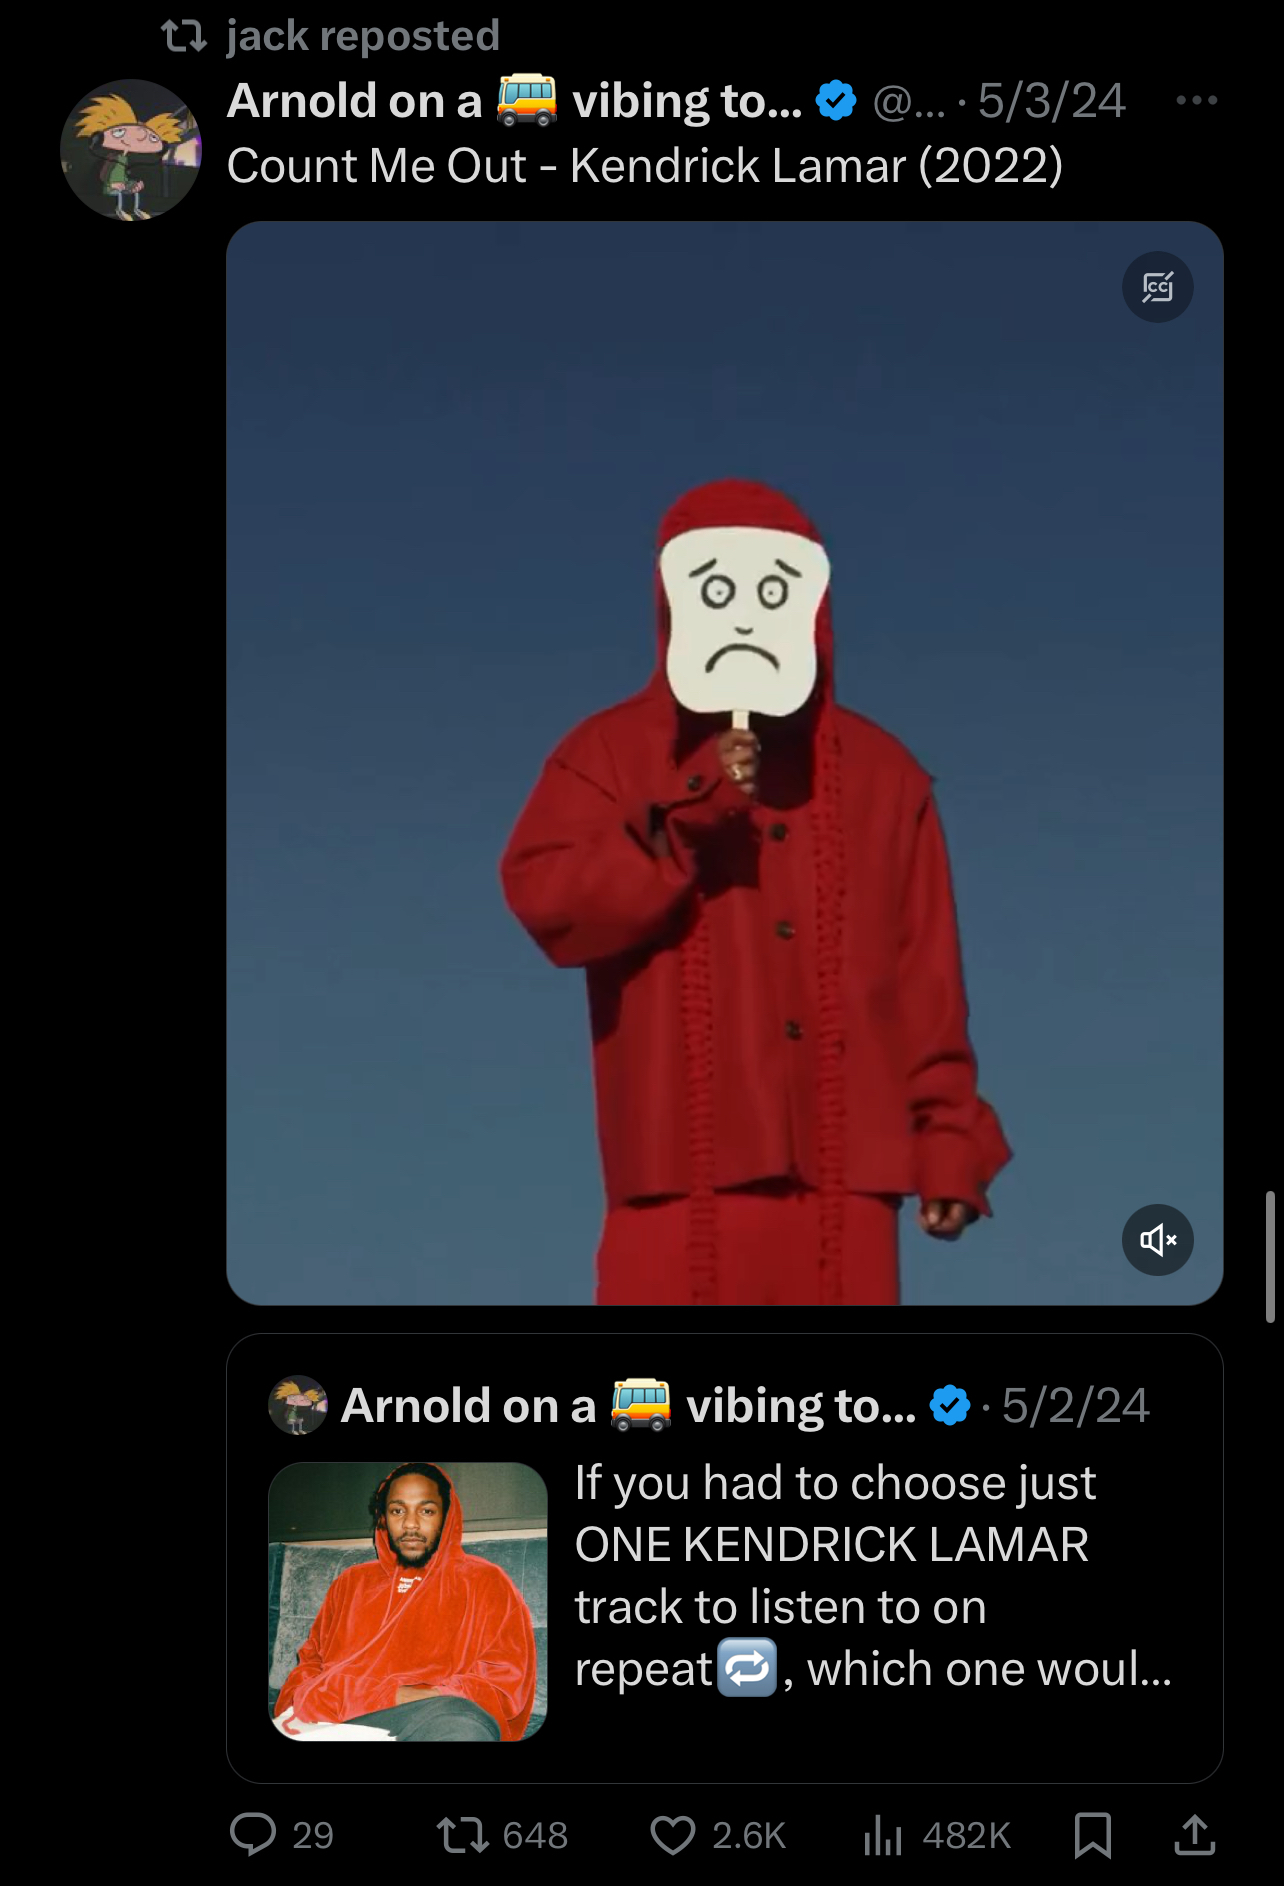 Person in red hooded outfit with a placard face onstage, with reposted tweet overlay